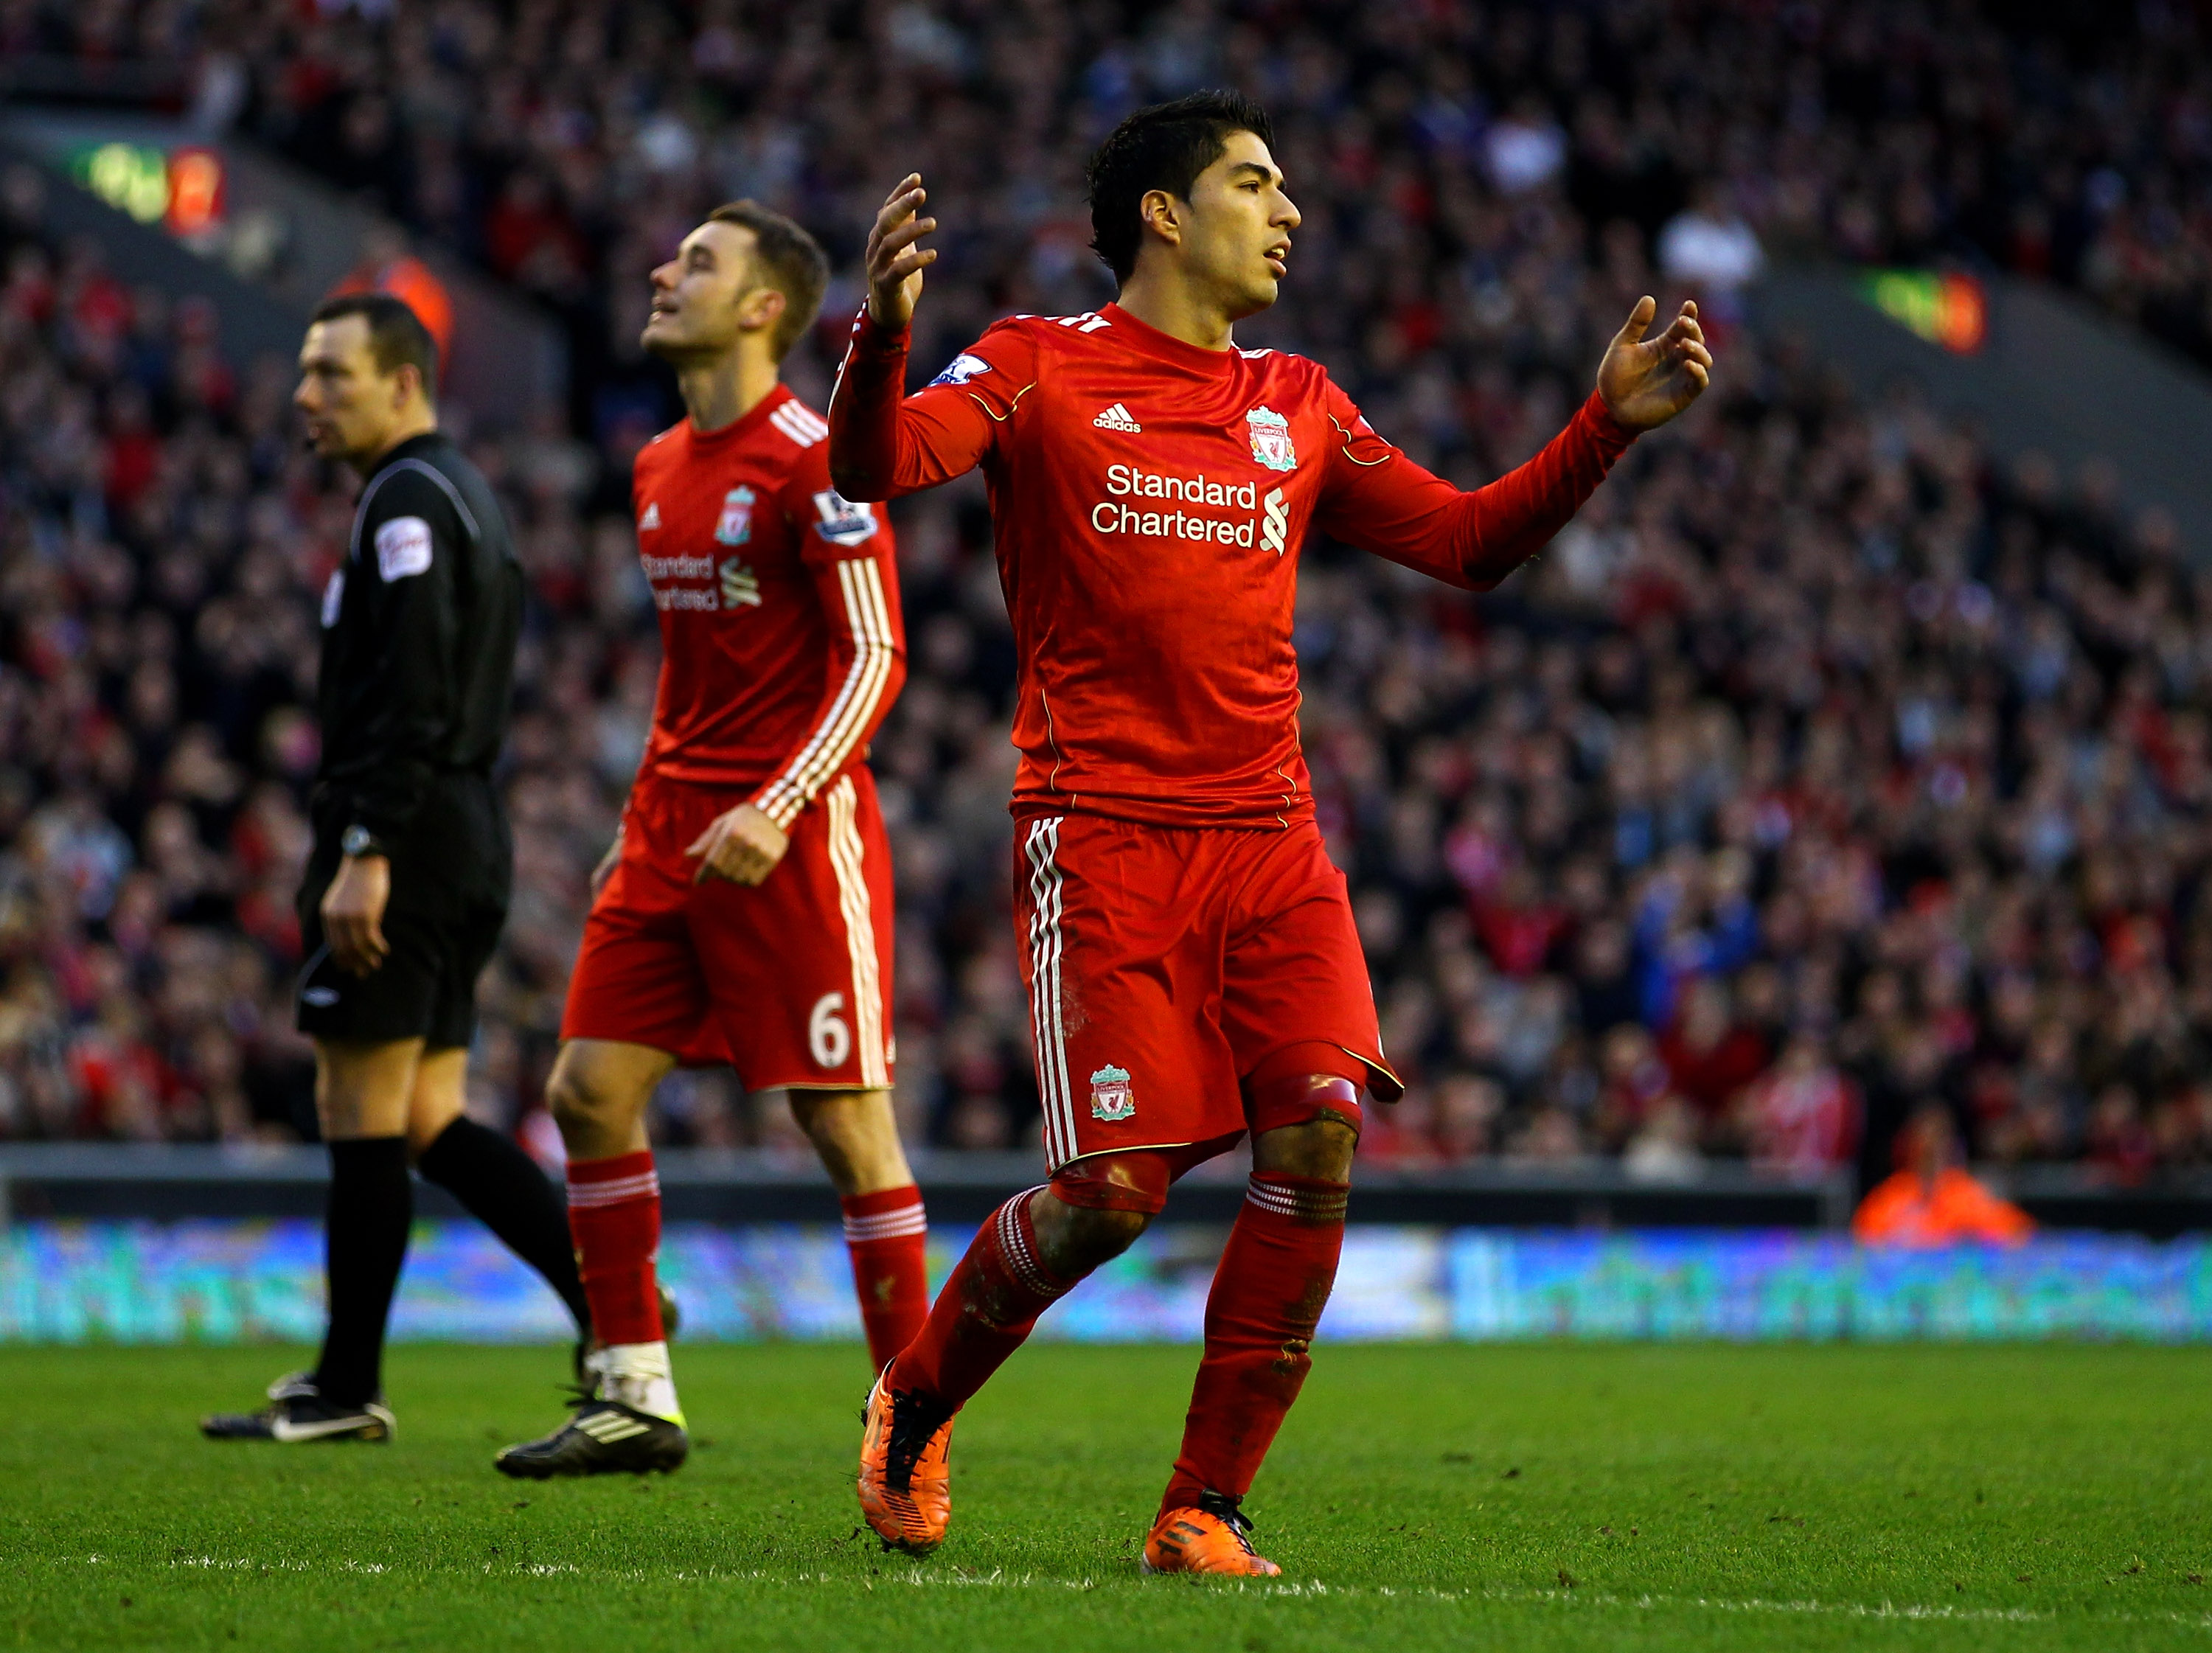 LIVERPOOL, ENGLAND - FEBRUARY 12:  Luis Suarez of Liverpool reacts to a missed chance during the Barclays Premier League match between Liverpool and Wigan Athletic at Anfield on February 12, 2011 in Liverpool, England.  (Photo by Clive Brunskill/Getty Ima